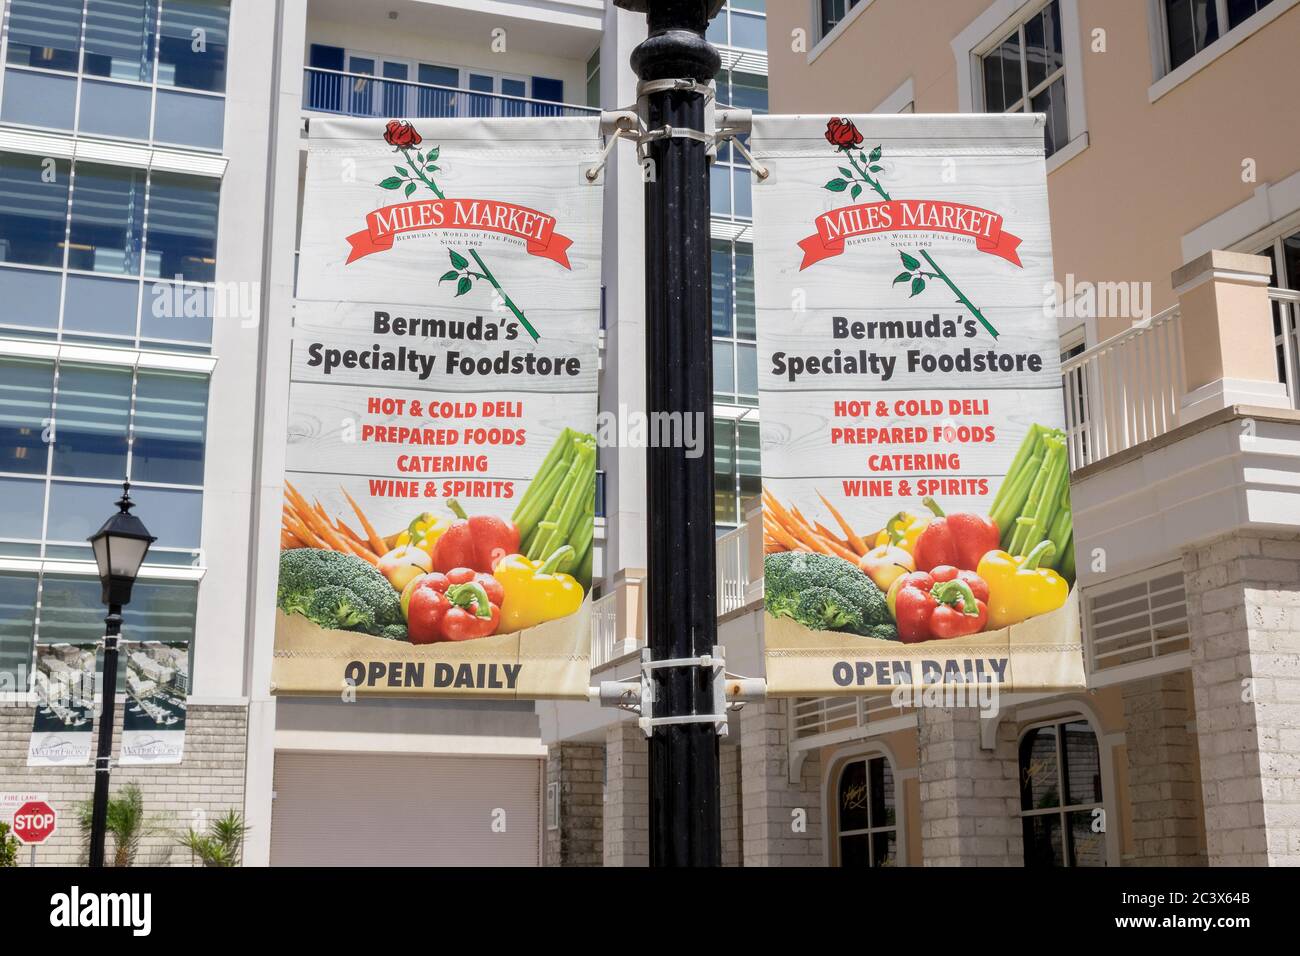 Banner Sign Flags Advertising Miles Market Foodstore Supermarket In Hamilton Bermuda A High End Grocery Store Stock Photo